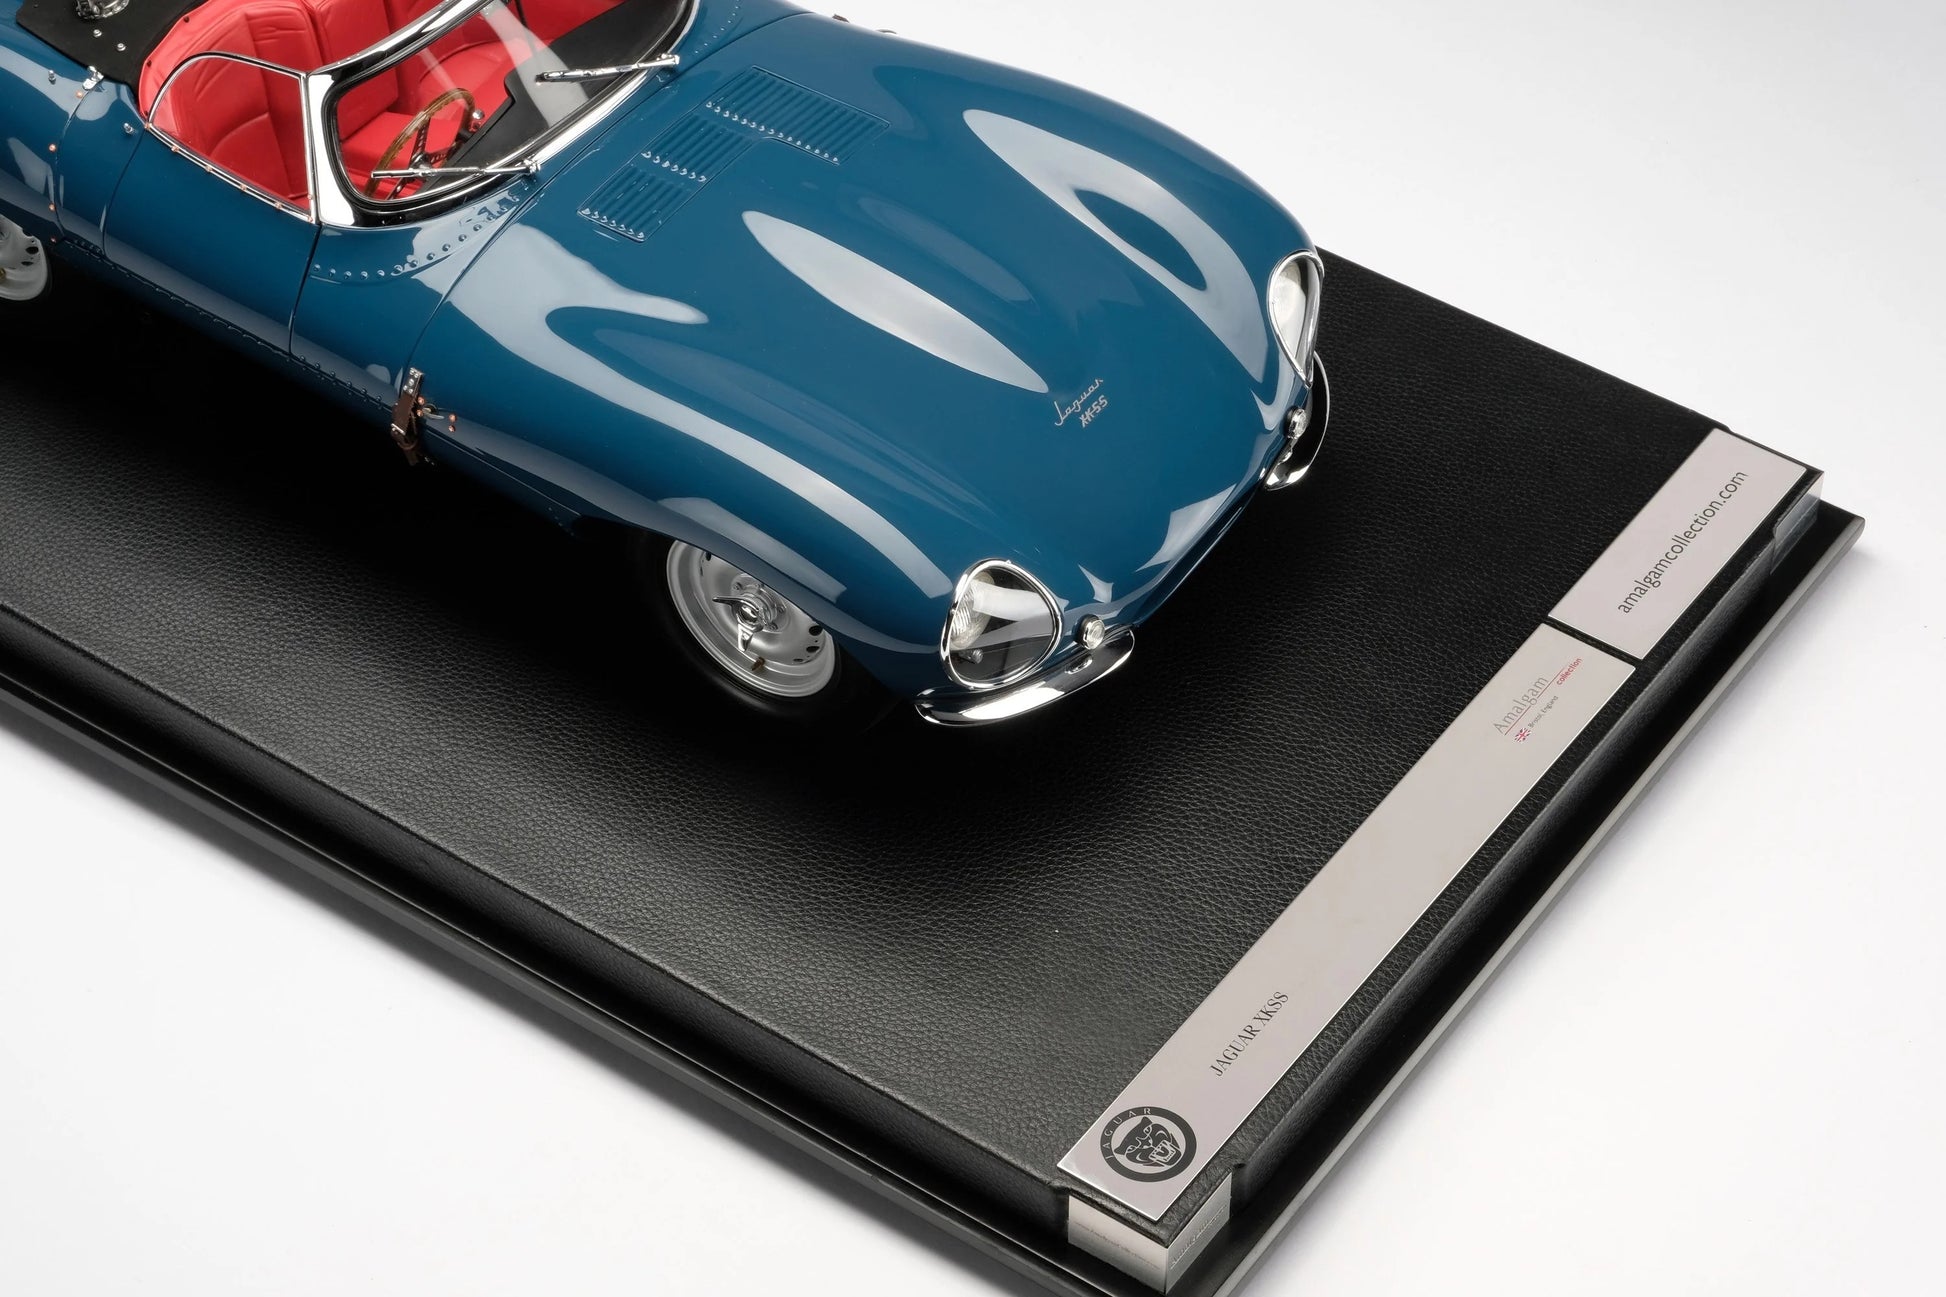 Amalgam Collection Jaguar XKSS 1:8 Model Car | Exquisite Collector's Edition, Precision-Crafted Replica of Classic Icon | 2Jour Concierge, #1 luxury high-end gift & lifestyle shop